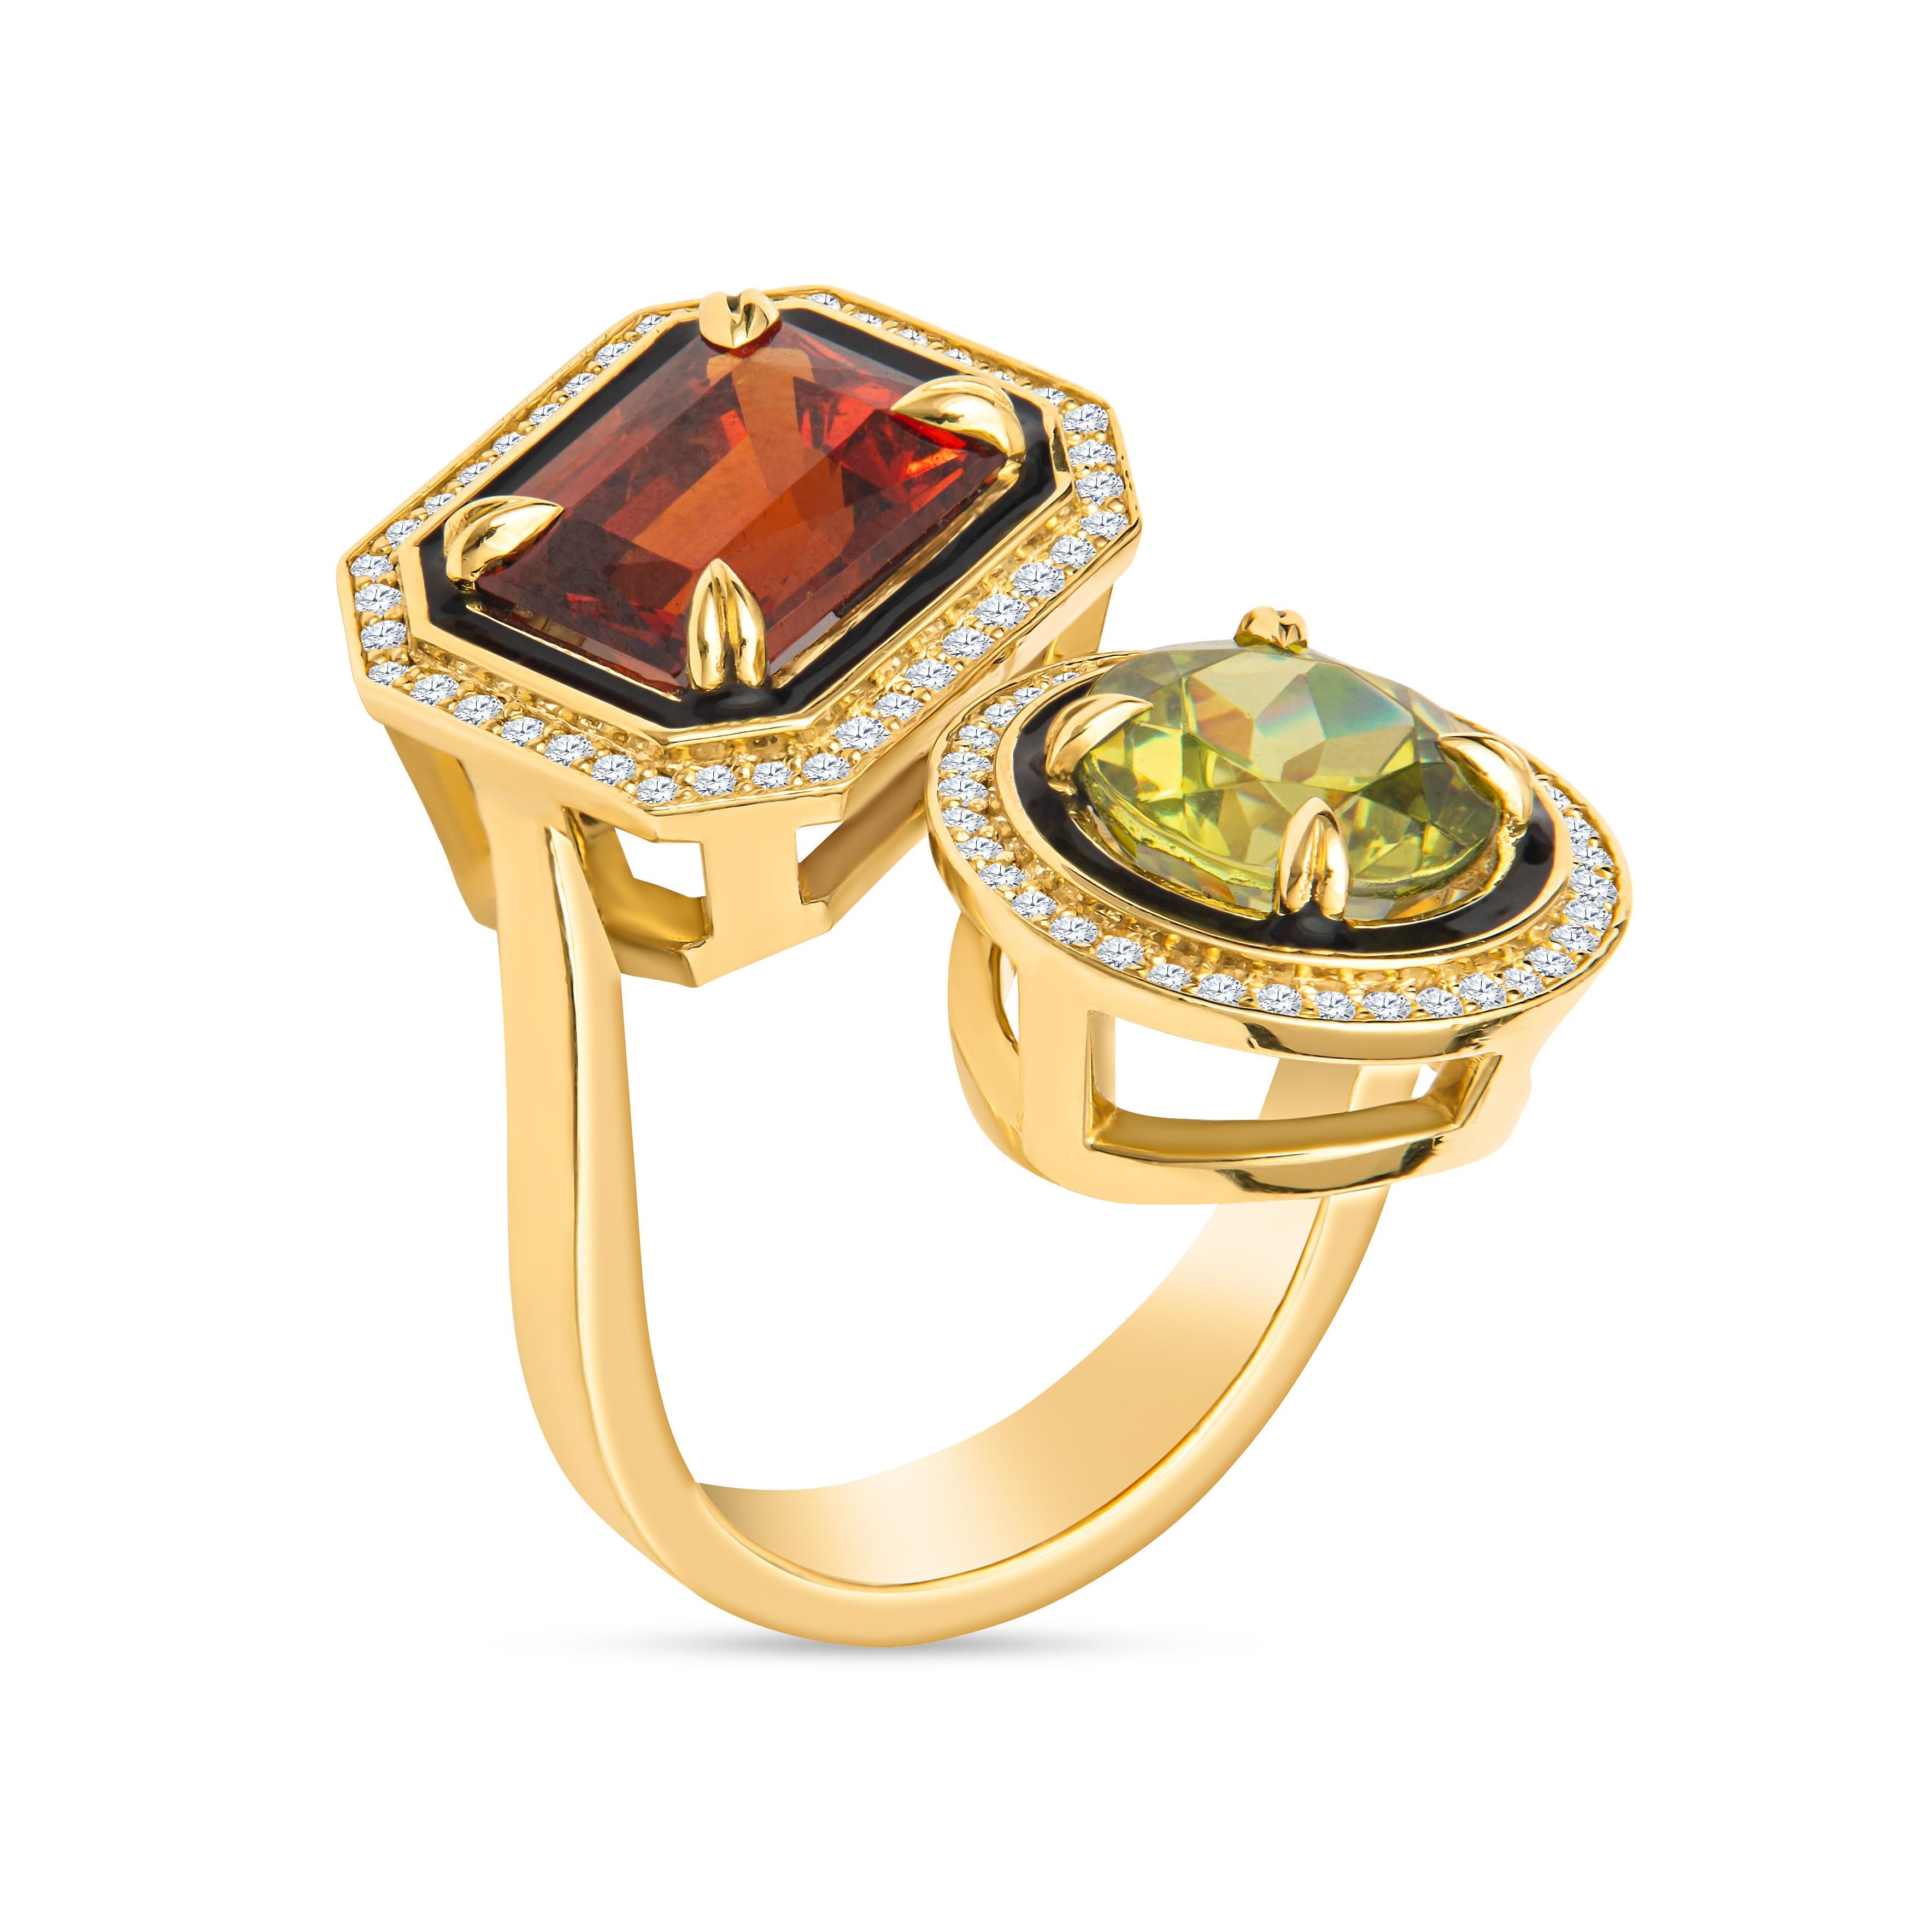 This statement cocktail ring features a 5.21 carat rectangular step cut spessartite garnet in that perfect orange reddish brown tone and a 4 carat round Sphene. It makes quite a statement in the eagle claw setting with the black enamel and diamond